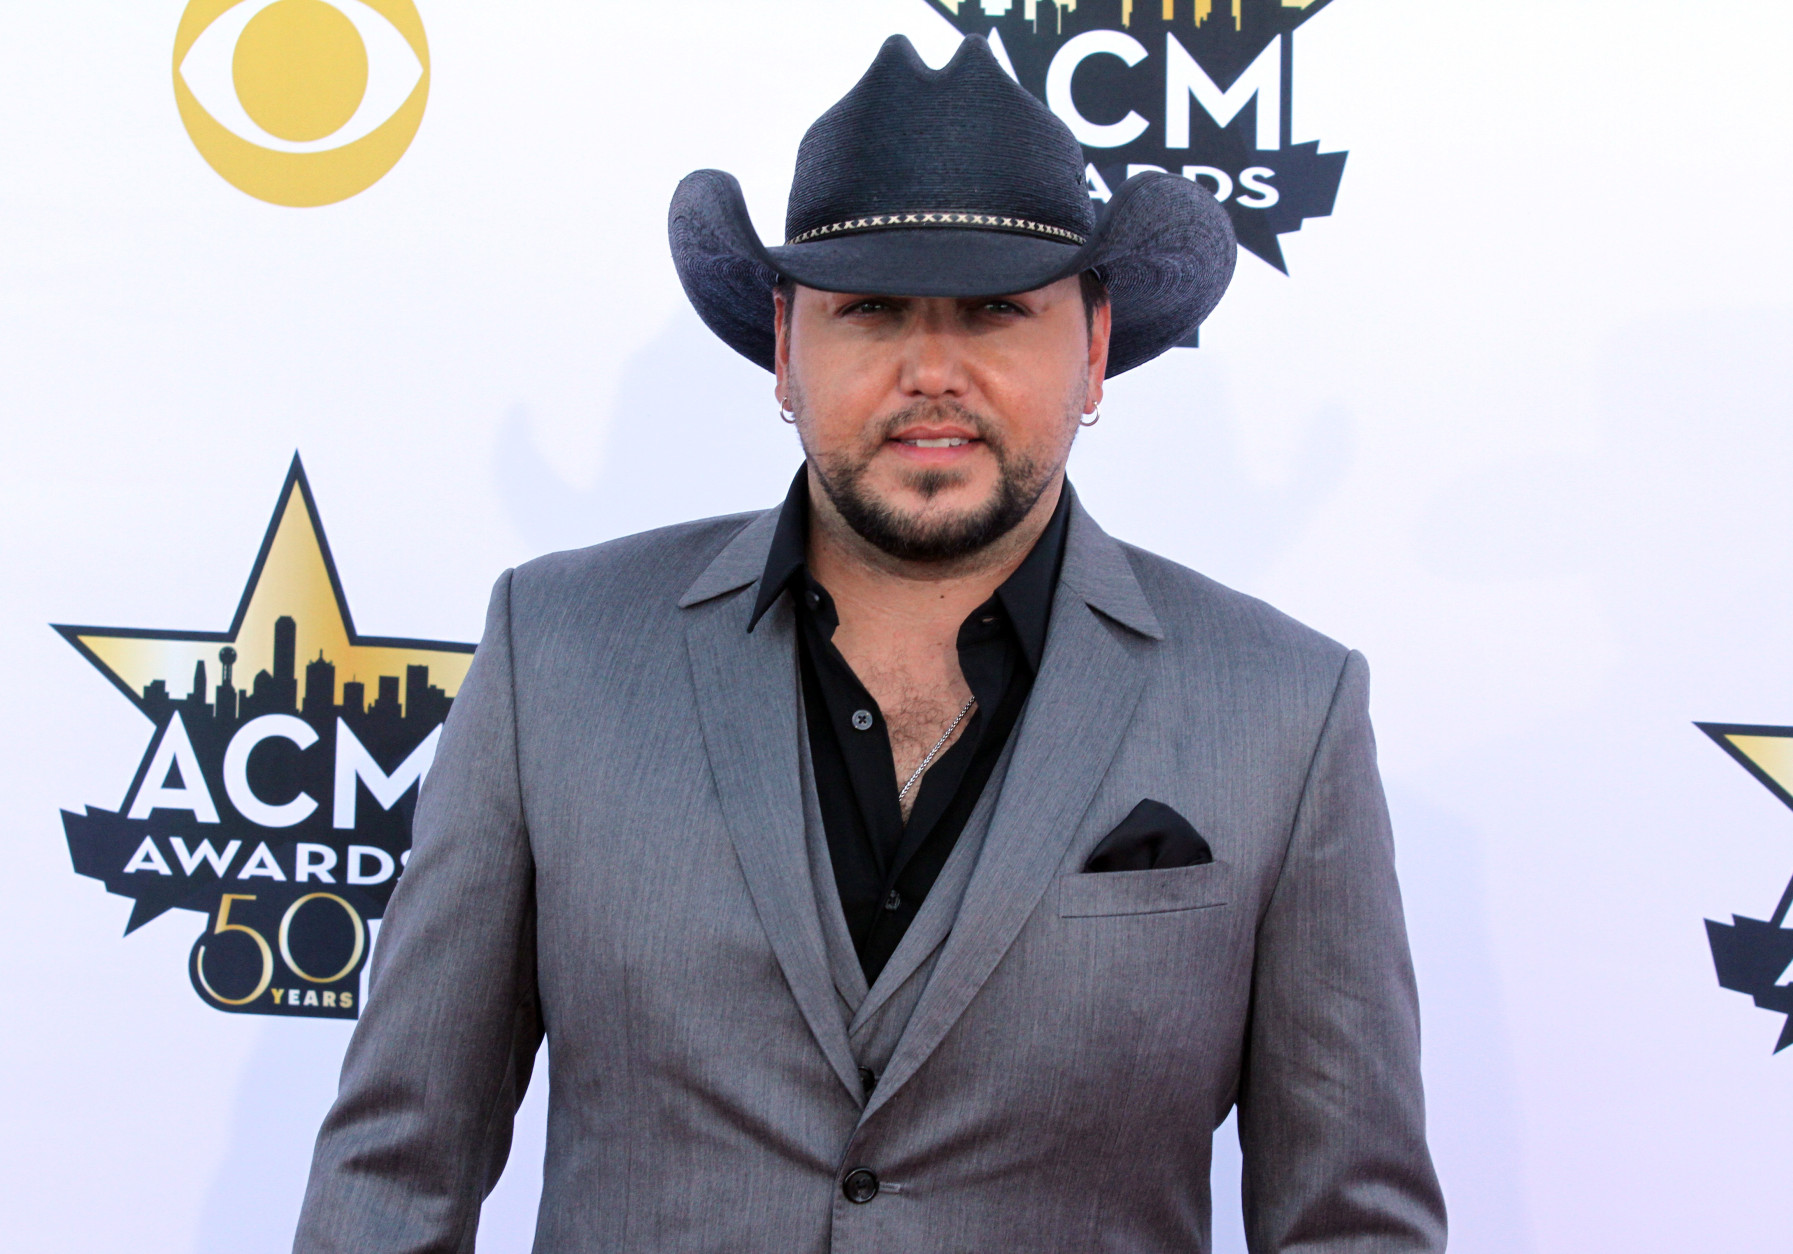 Jason Aldean arrives at the 50th annual Academy of Country Music Awards at AT&amp;T Stadium on Sunday, April 19, 2015, in Arlington, Texas. (Photo by Jack Plunkett/Invision/AP)